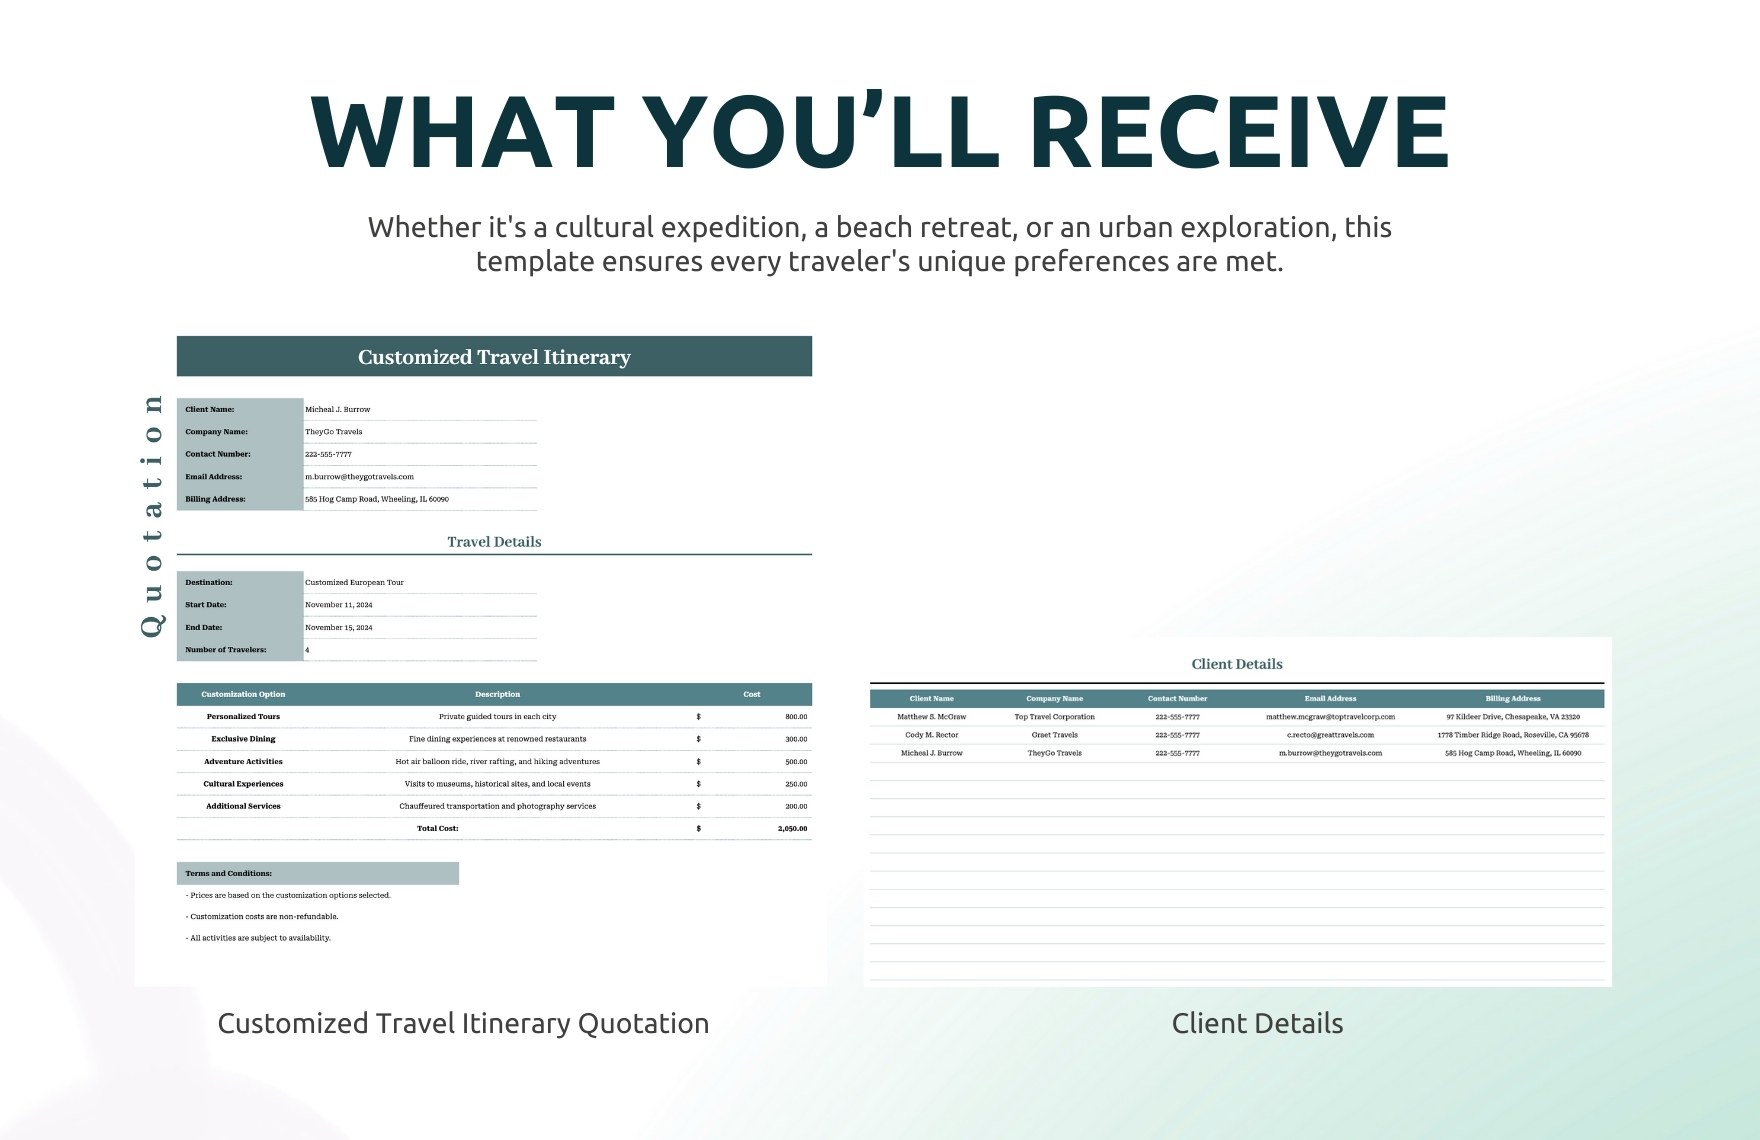 Customized Travel Itinerary Quotation Template